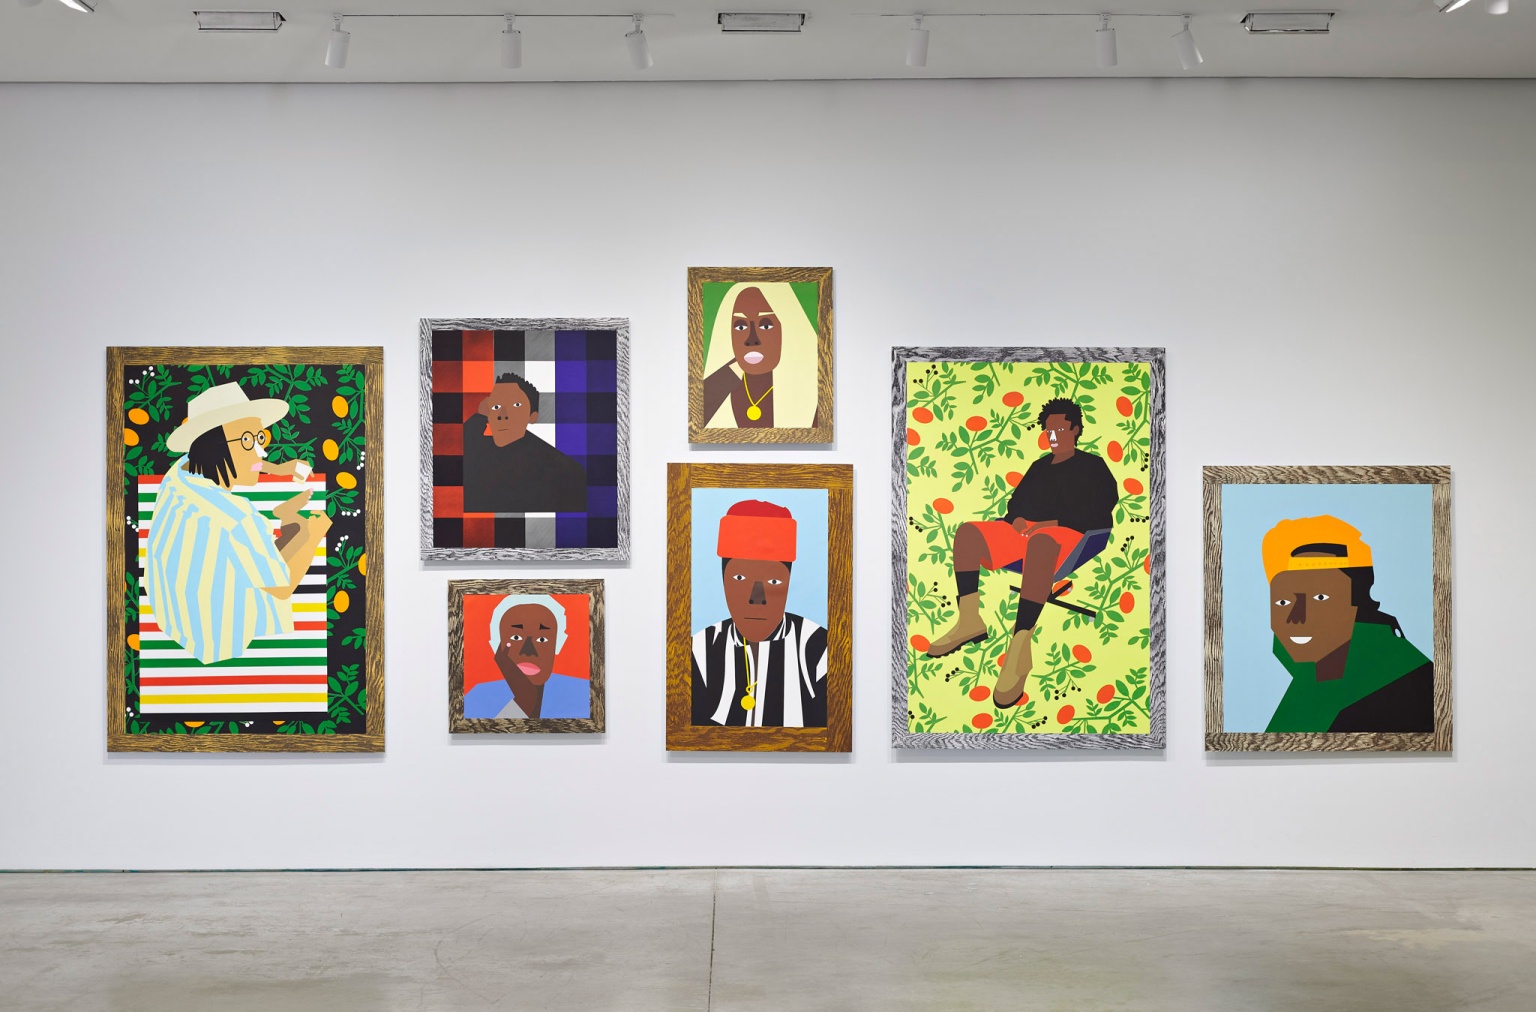 "CREW" (2021) by Nina Chanel Abney (installation view)